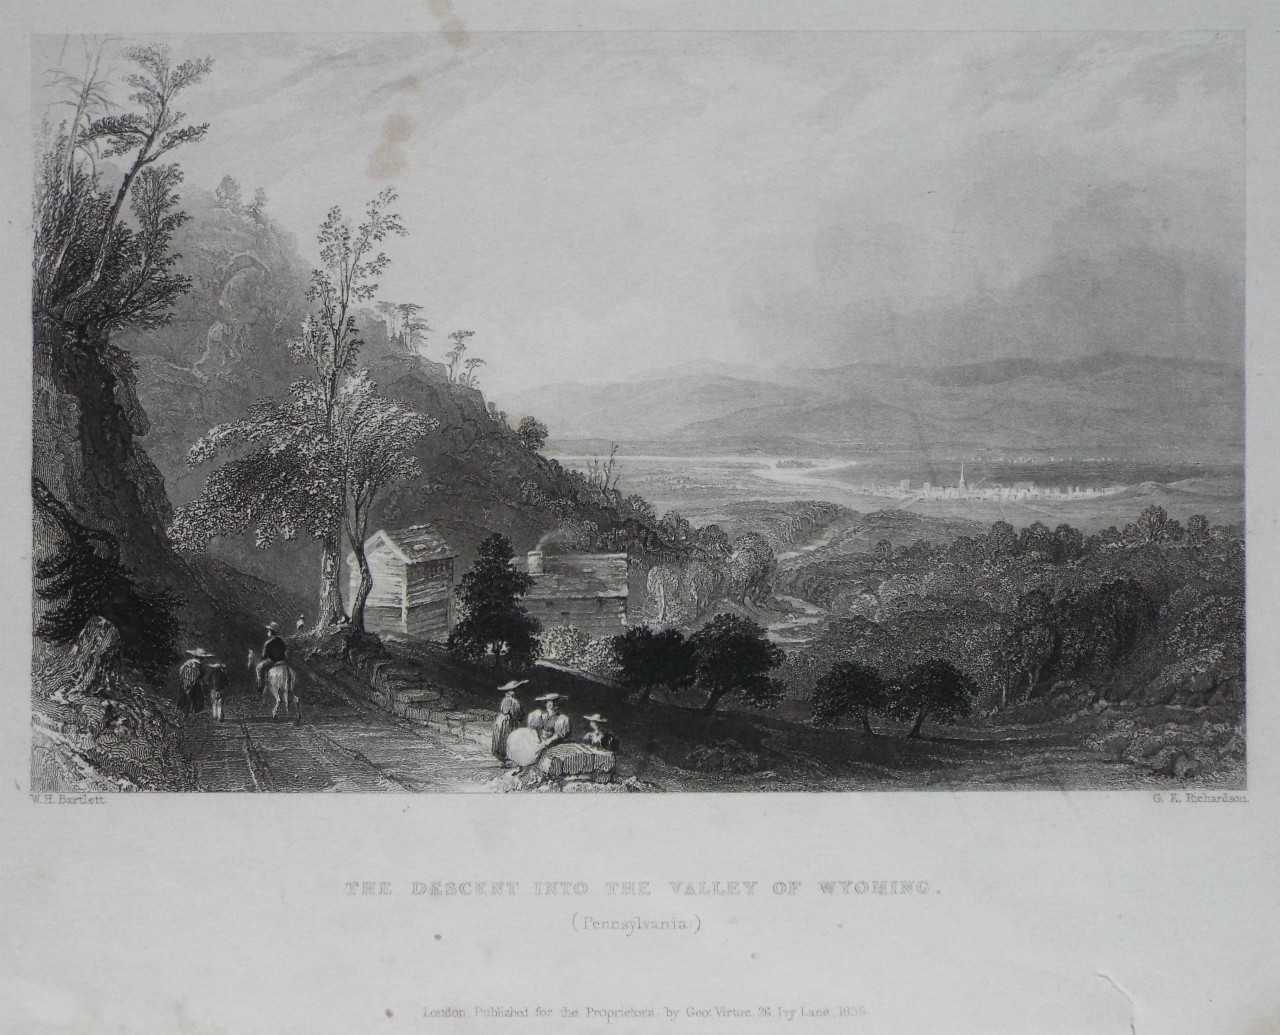 Print - The Descent into the Valley of Wyoming. (Pennsylvania) - Richardson